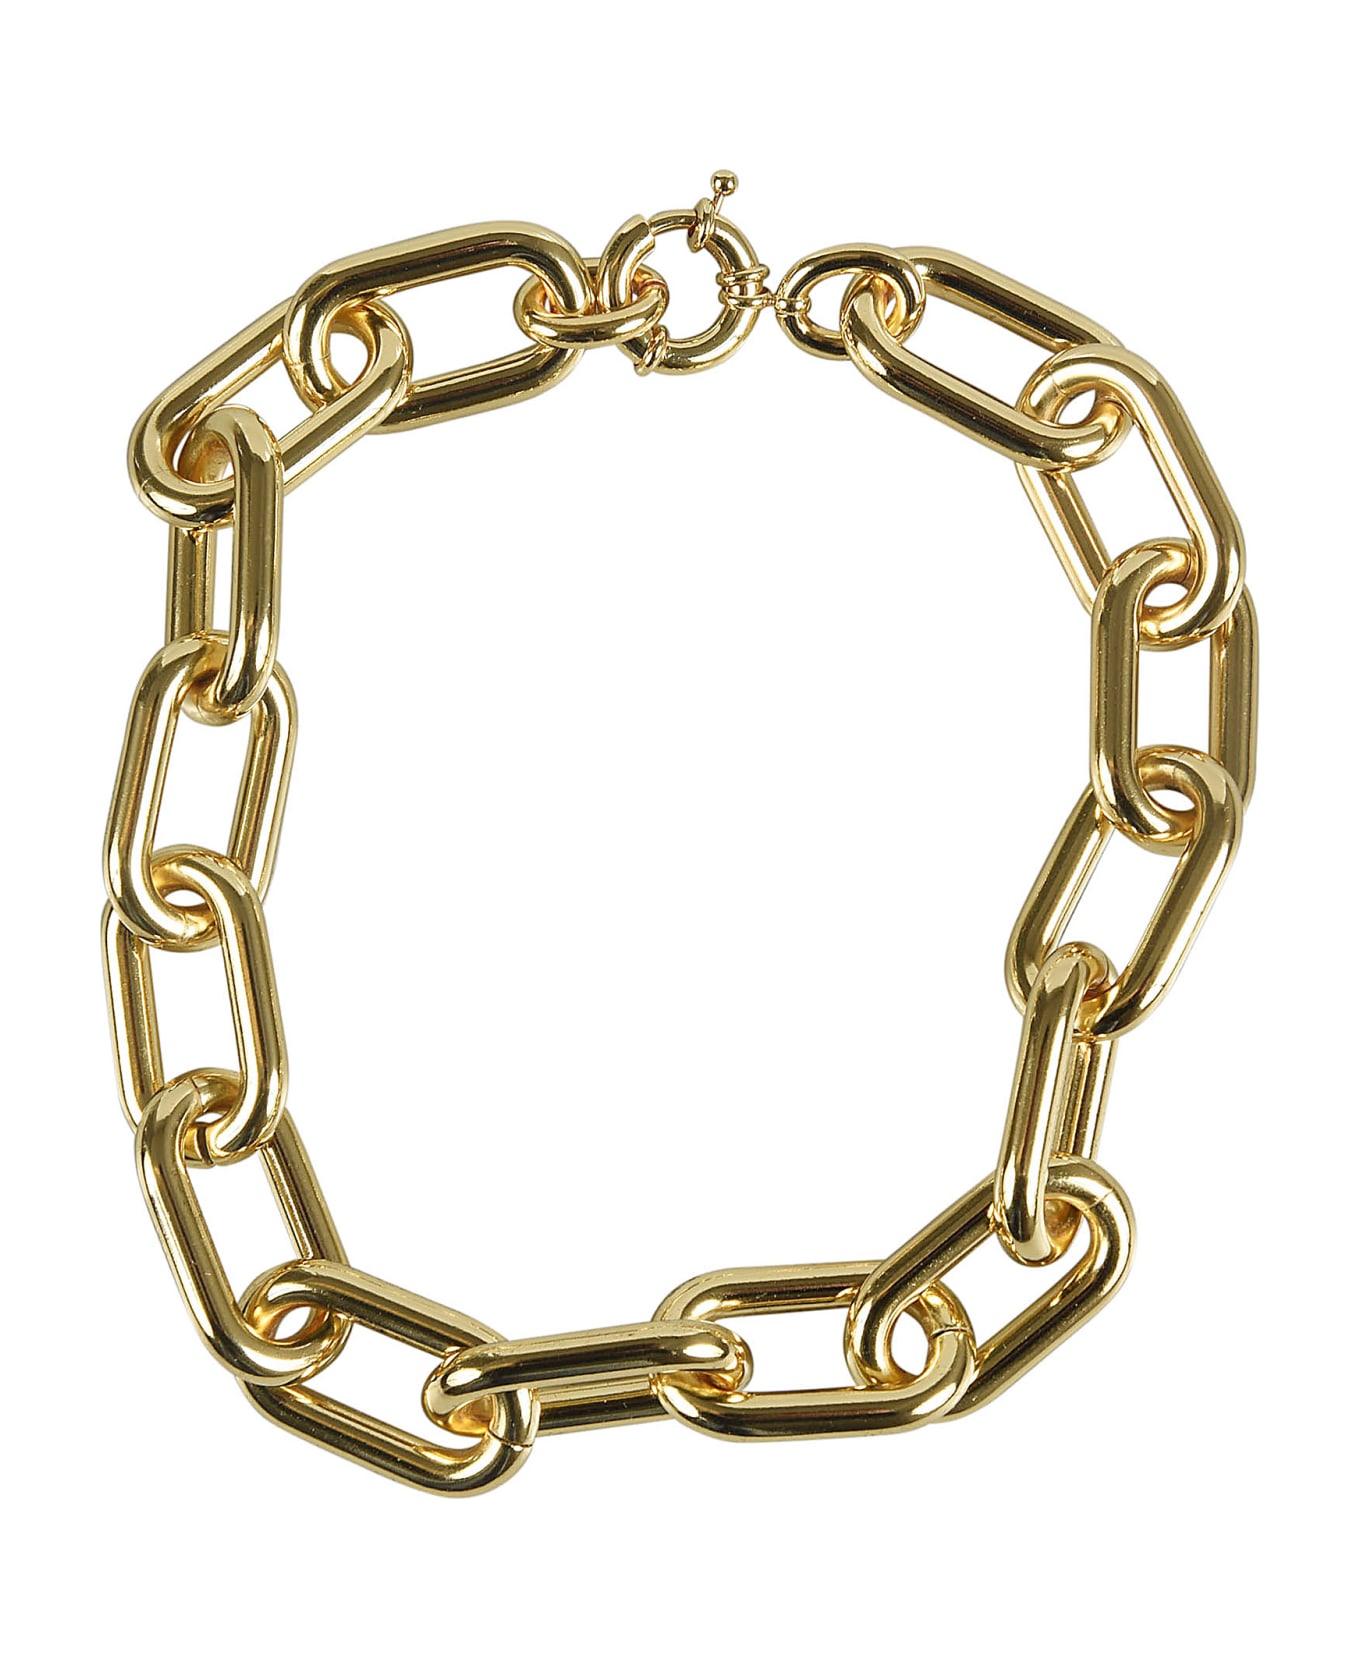 Federica Tosi 'norah' Gold-plated Chain Necklace Woman Federica Tosi - Golden